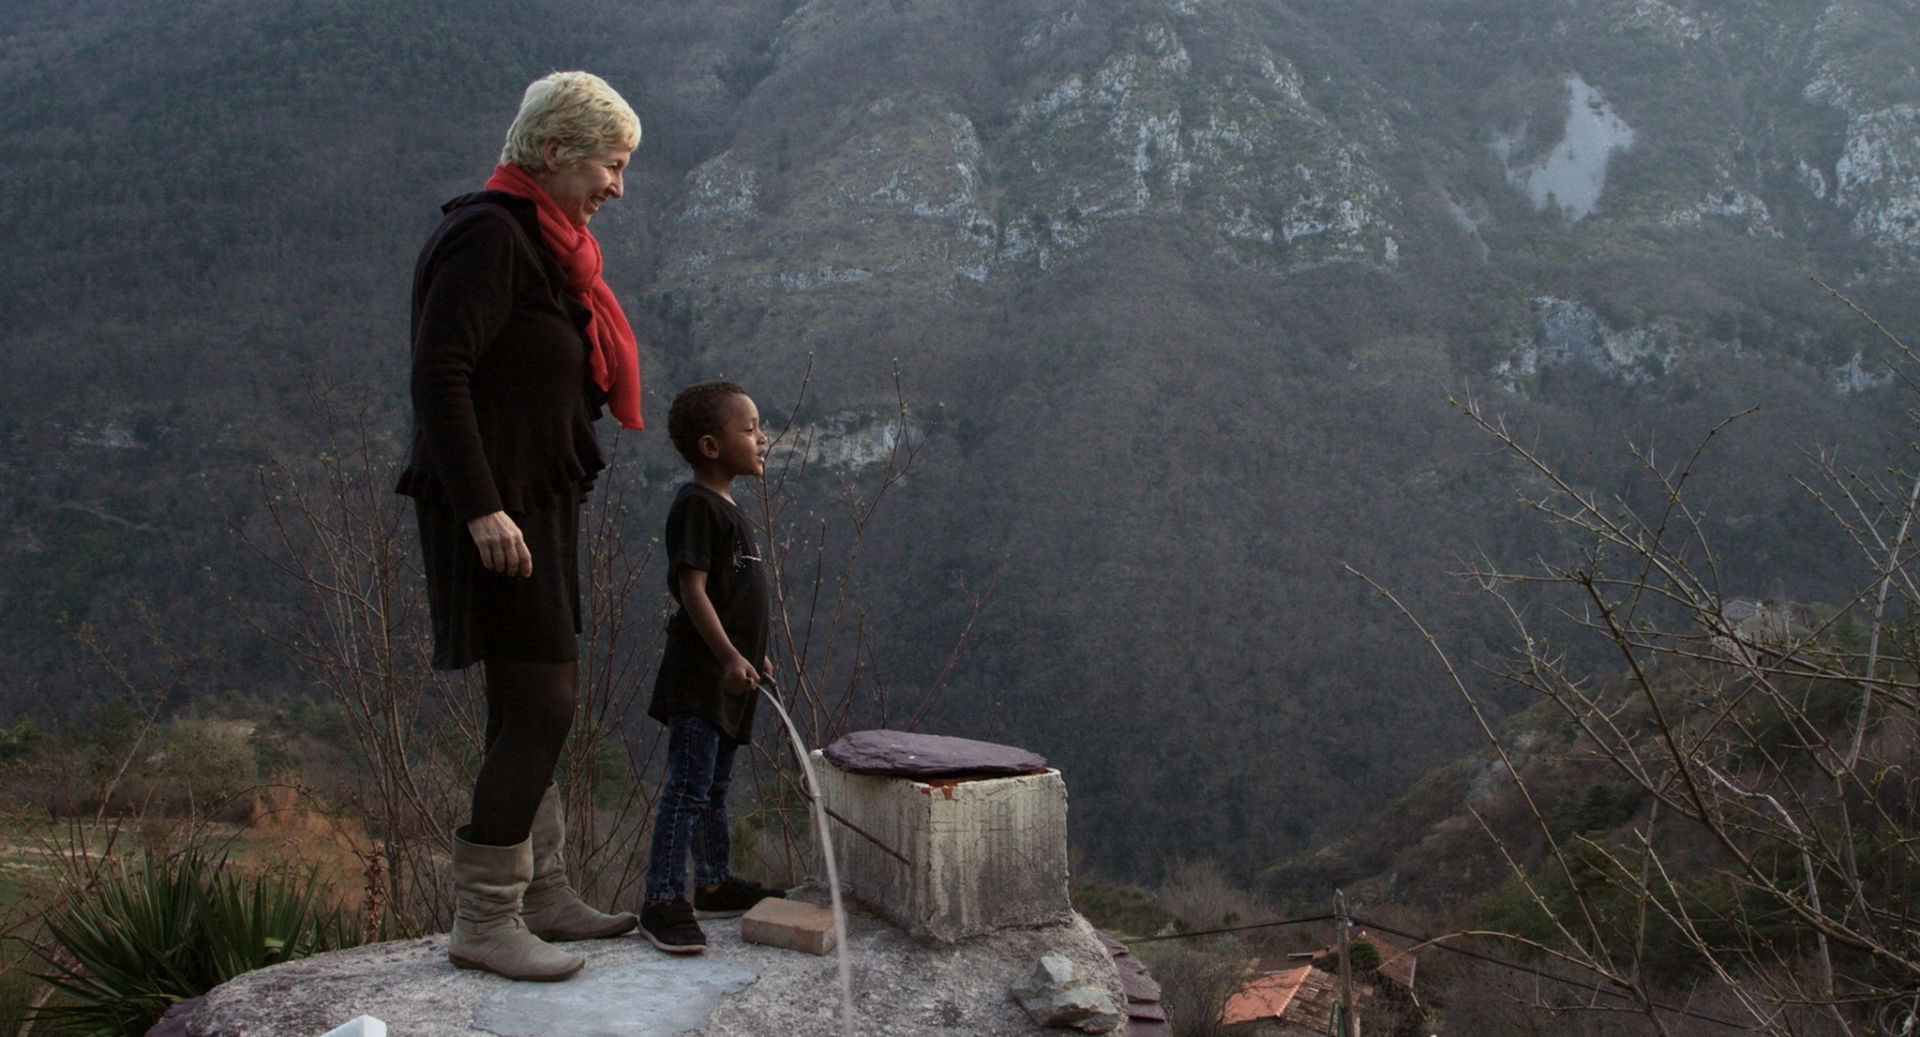 &quot;The Valley&quot; by ZeLIG graduates receives an important Award at Hot Docs